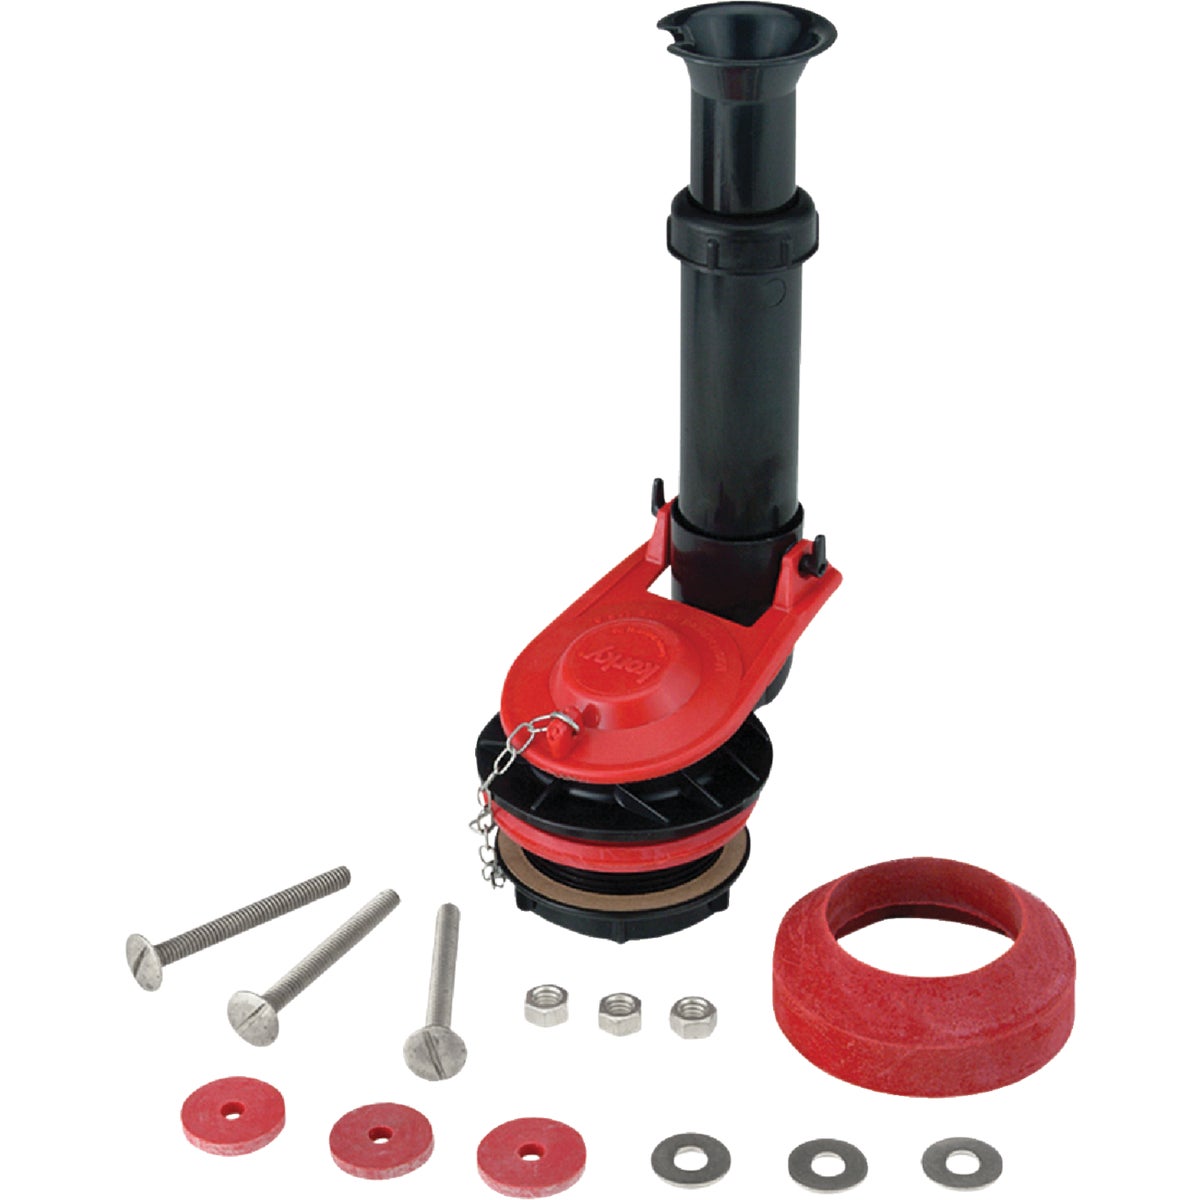 Item 449973, The Adjustable 2" Flush Valve and Tank to Bowl Gasket Kit is universal to 